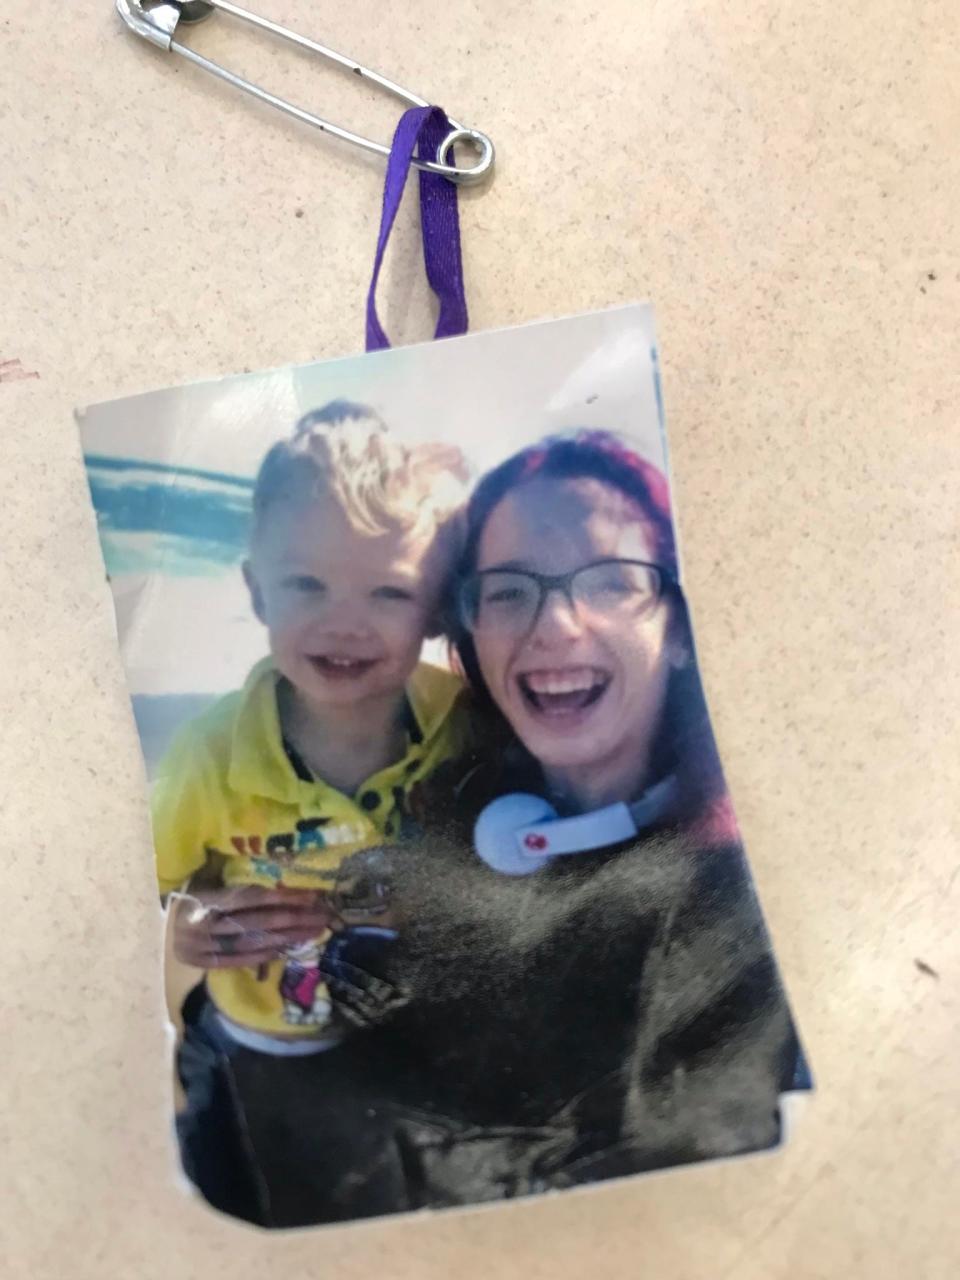 Tiny photographs of Karissa Fretwell beaming and holding her son Billy, with purple ribbons attached to safety pins, are handed out at their July 7, 2019 celebration of life. Purple was Karissa’s favorite color.